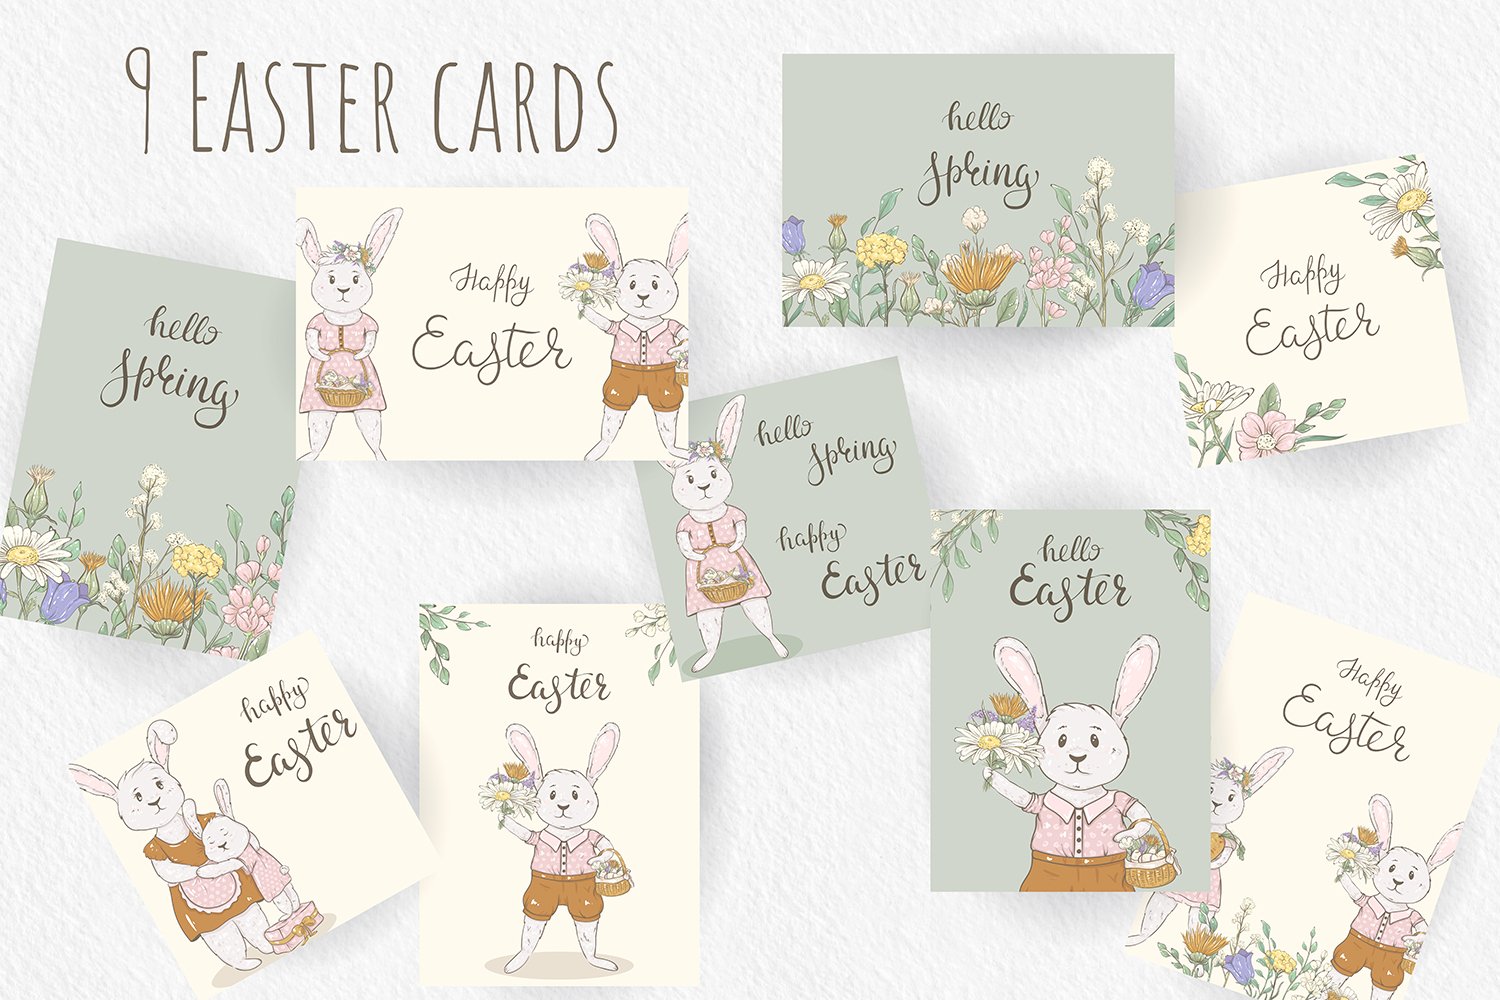 Diverse of cute Easter cards.